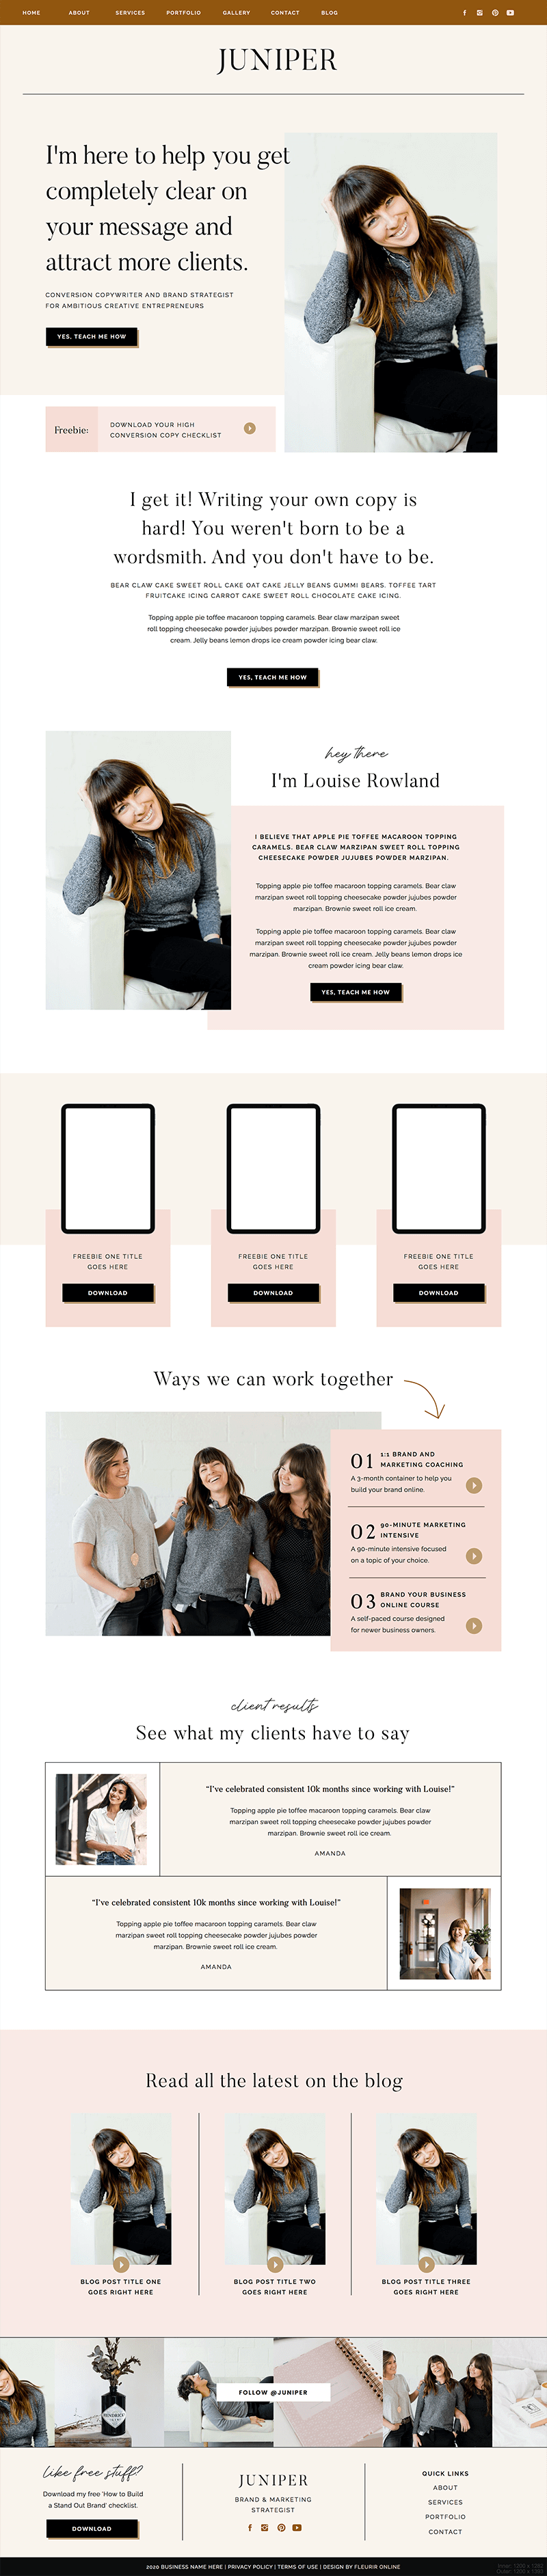 Juniper Showit template for coaches, creatives and photographers